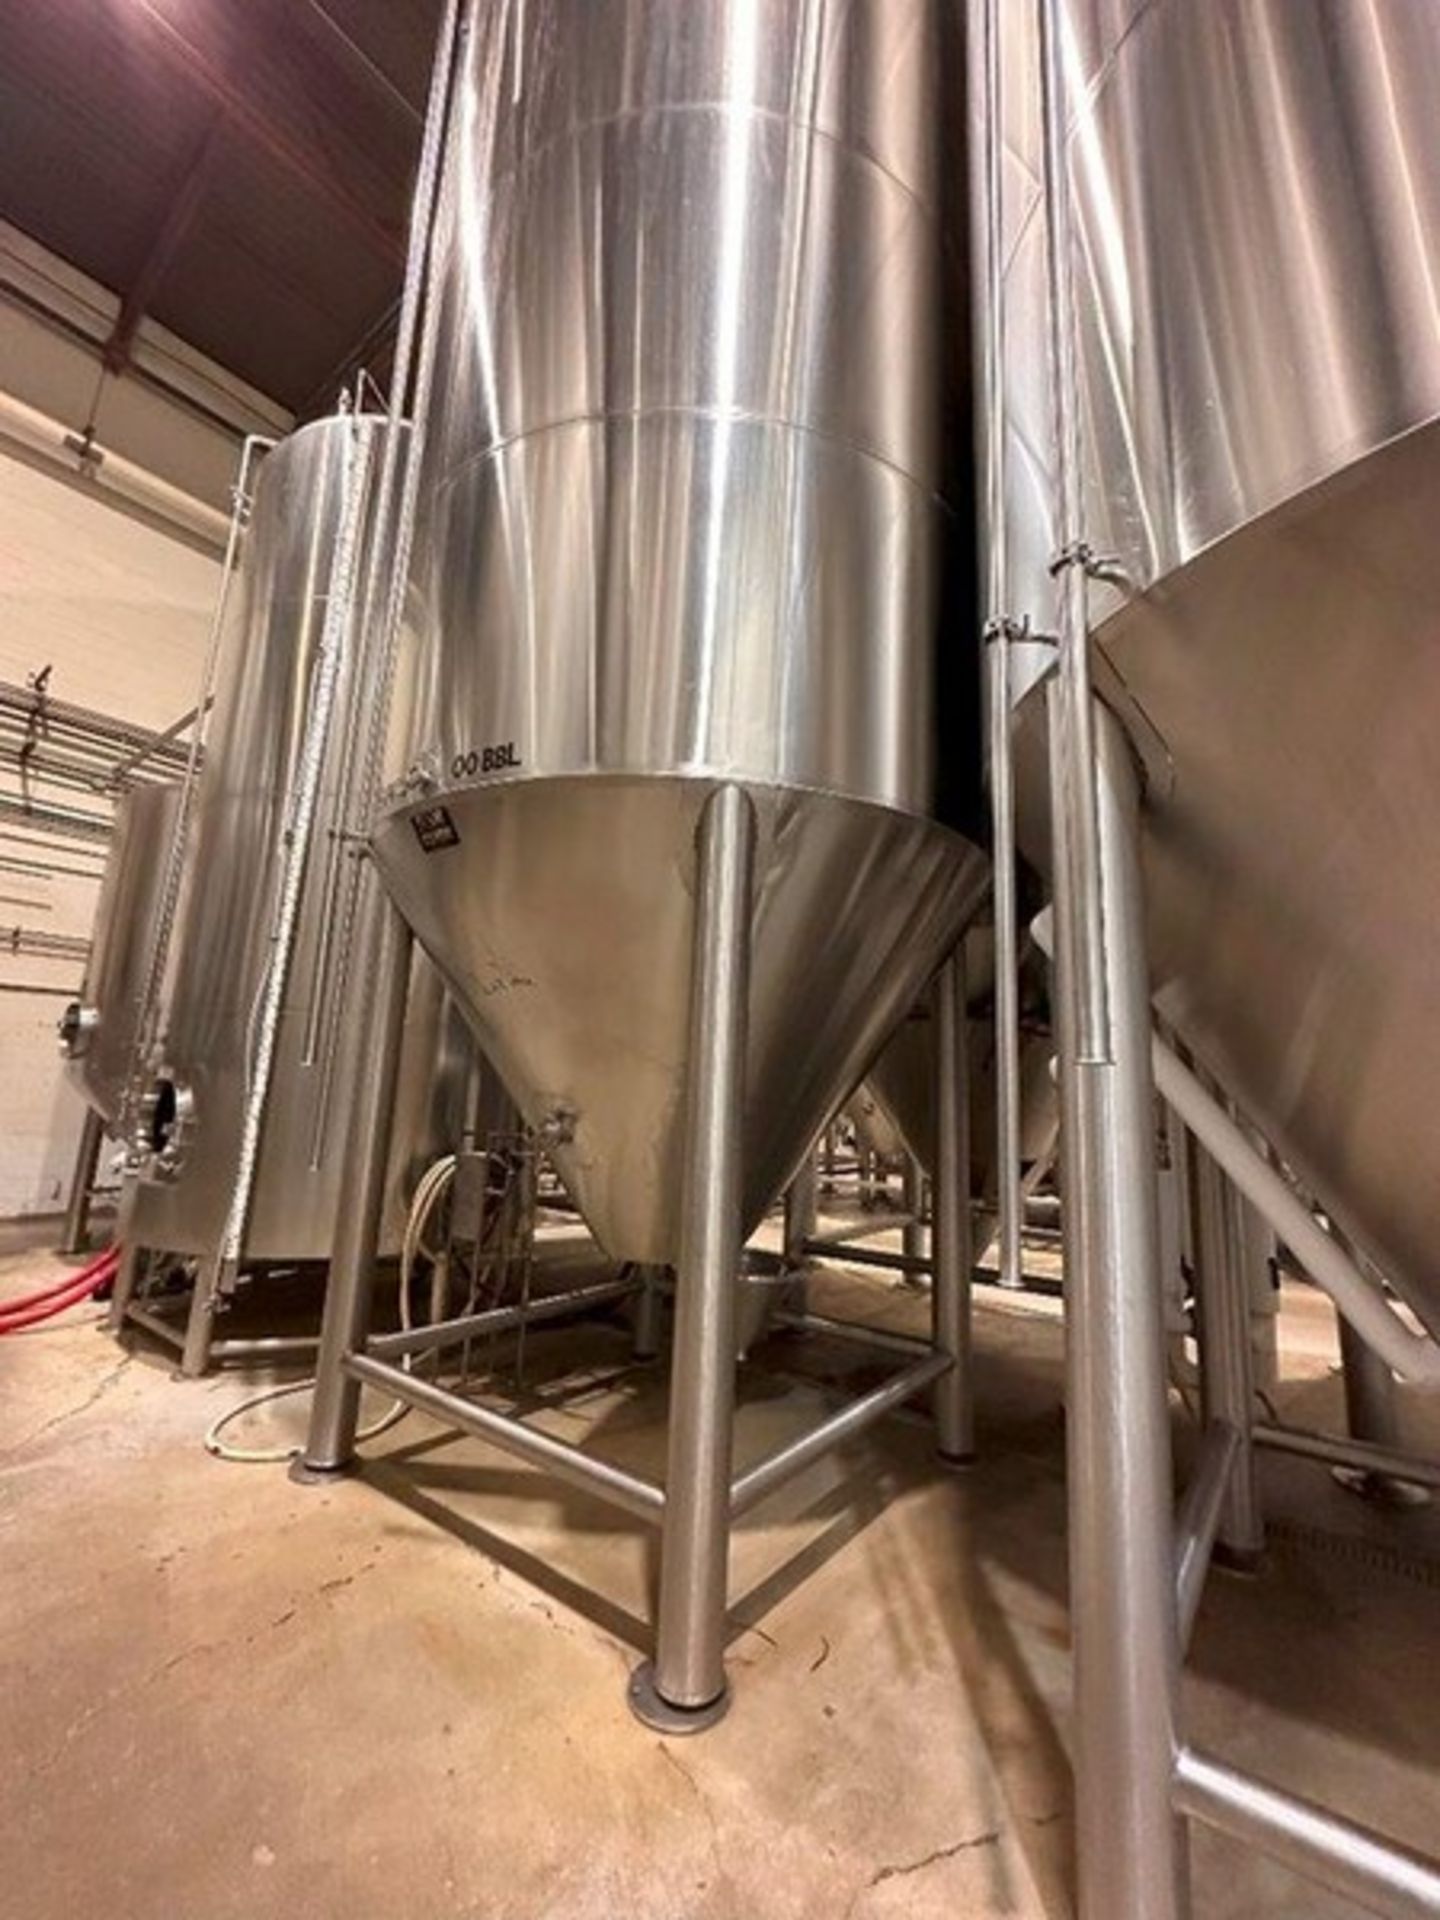 200 BBL (7991 gallon) Vertical Cone Bottom 304 Stainless Steel Jacketed Vessel. Manufactured by JV - Image 4 of 8